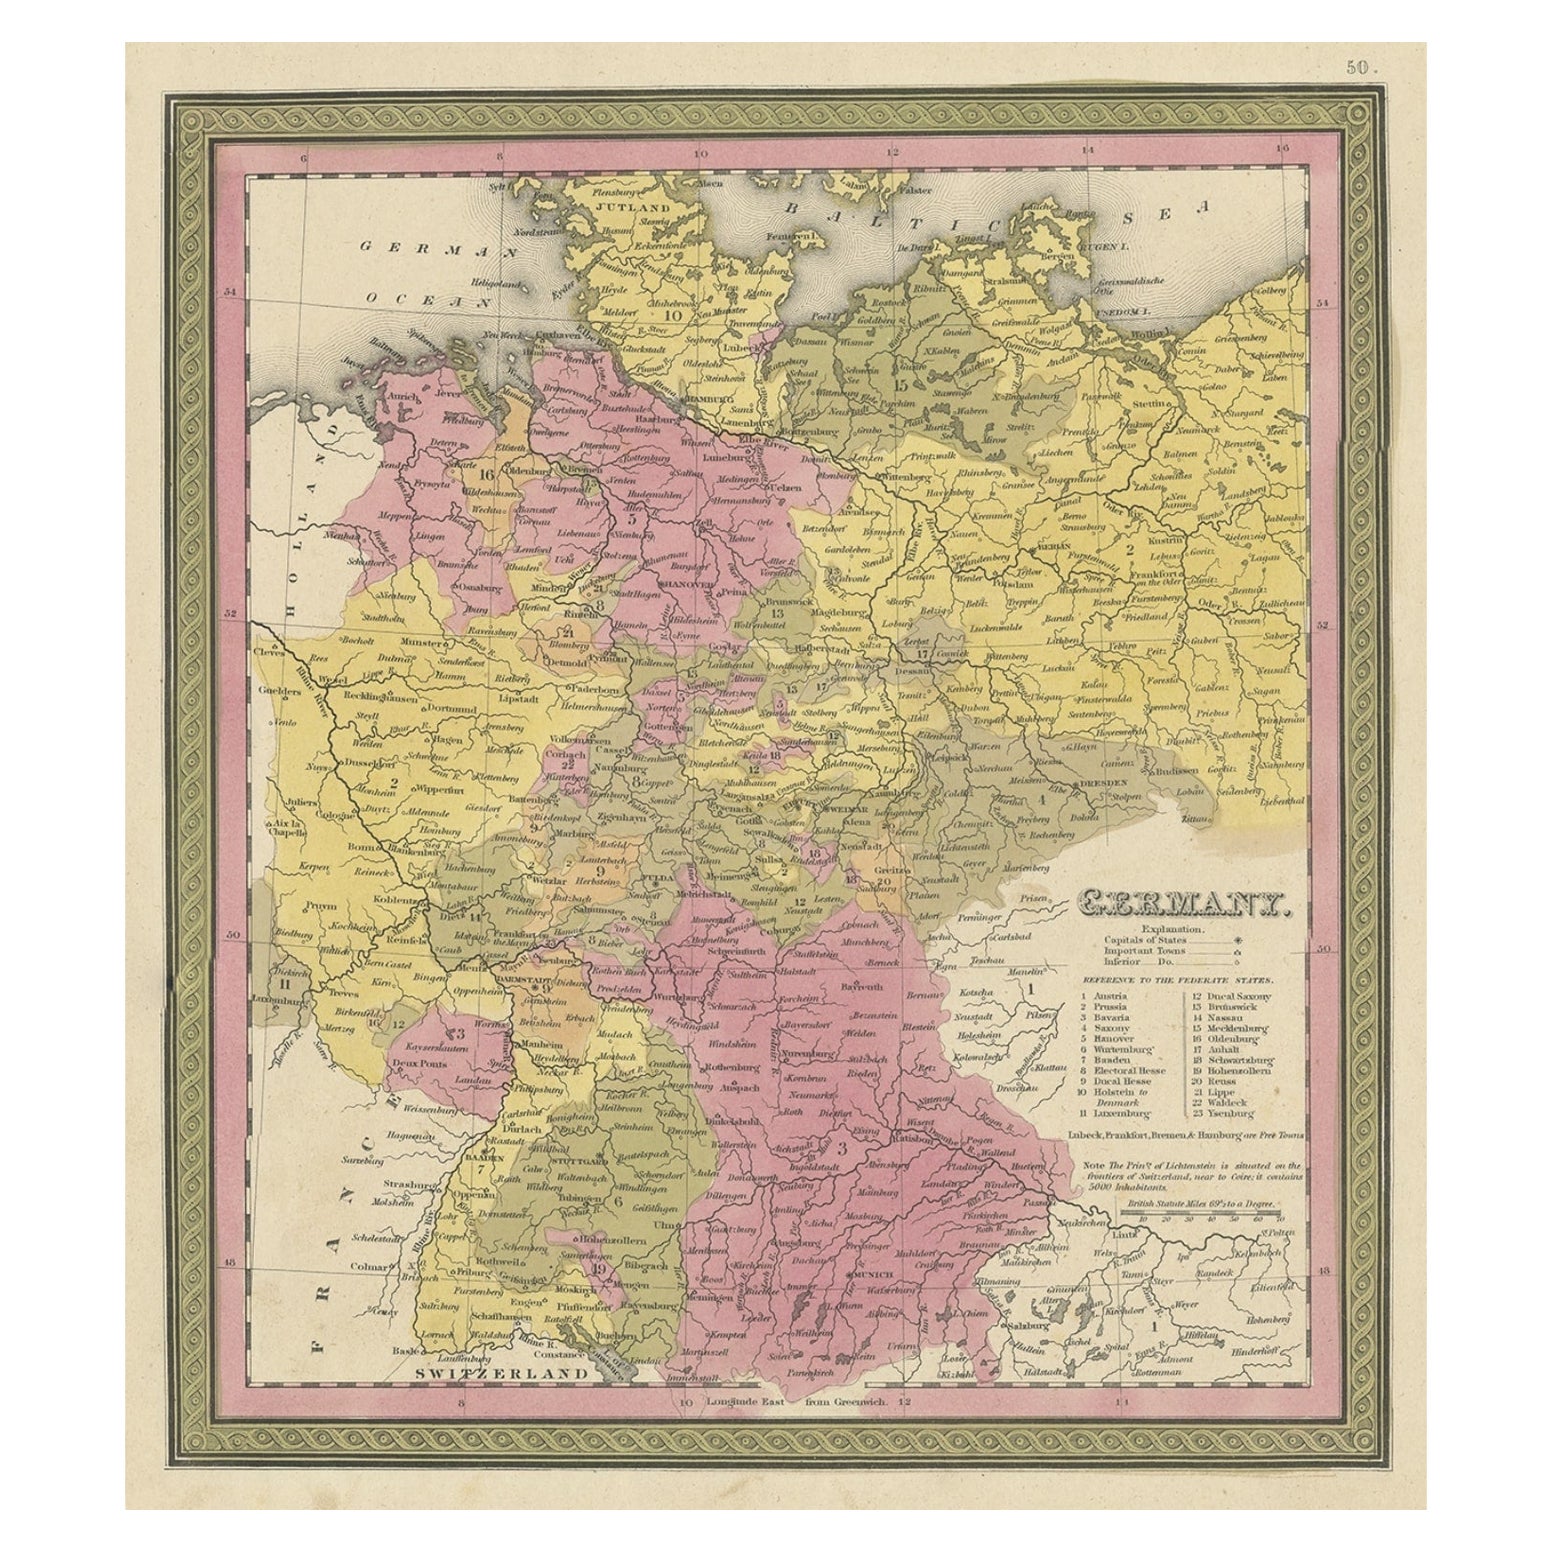 Decorative Antique Map of Germany, 1846